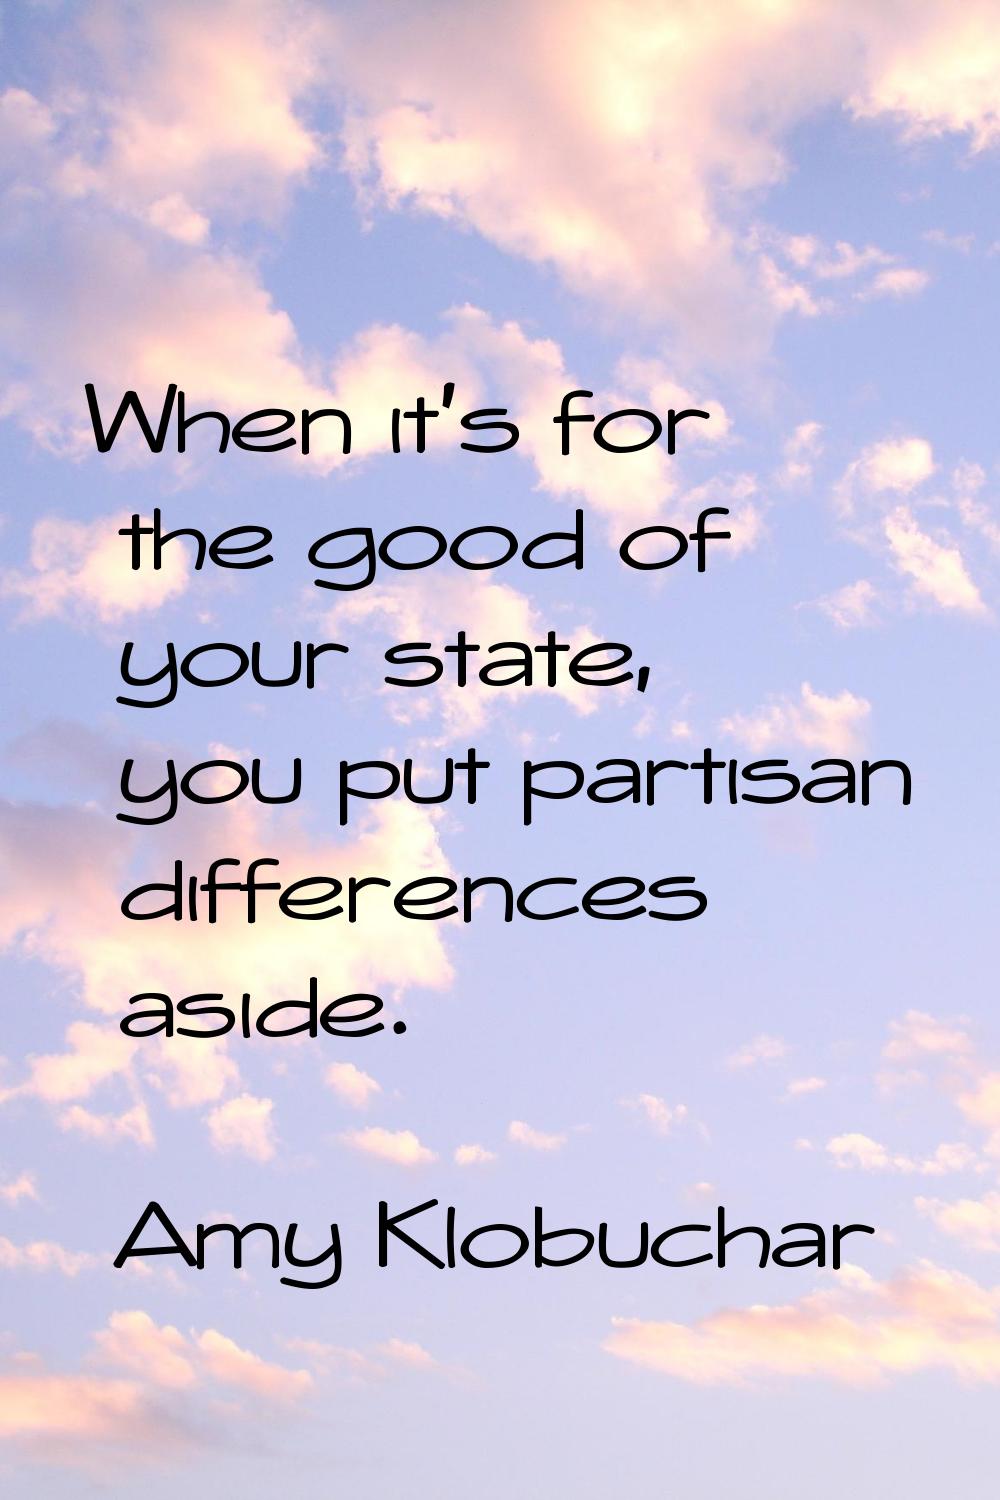 When it's for the good of your state, you put partisan differences aside.